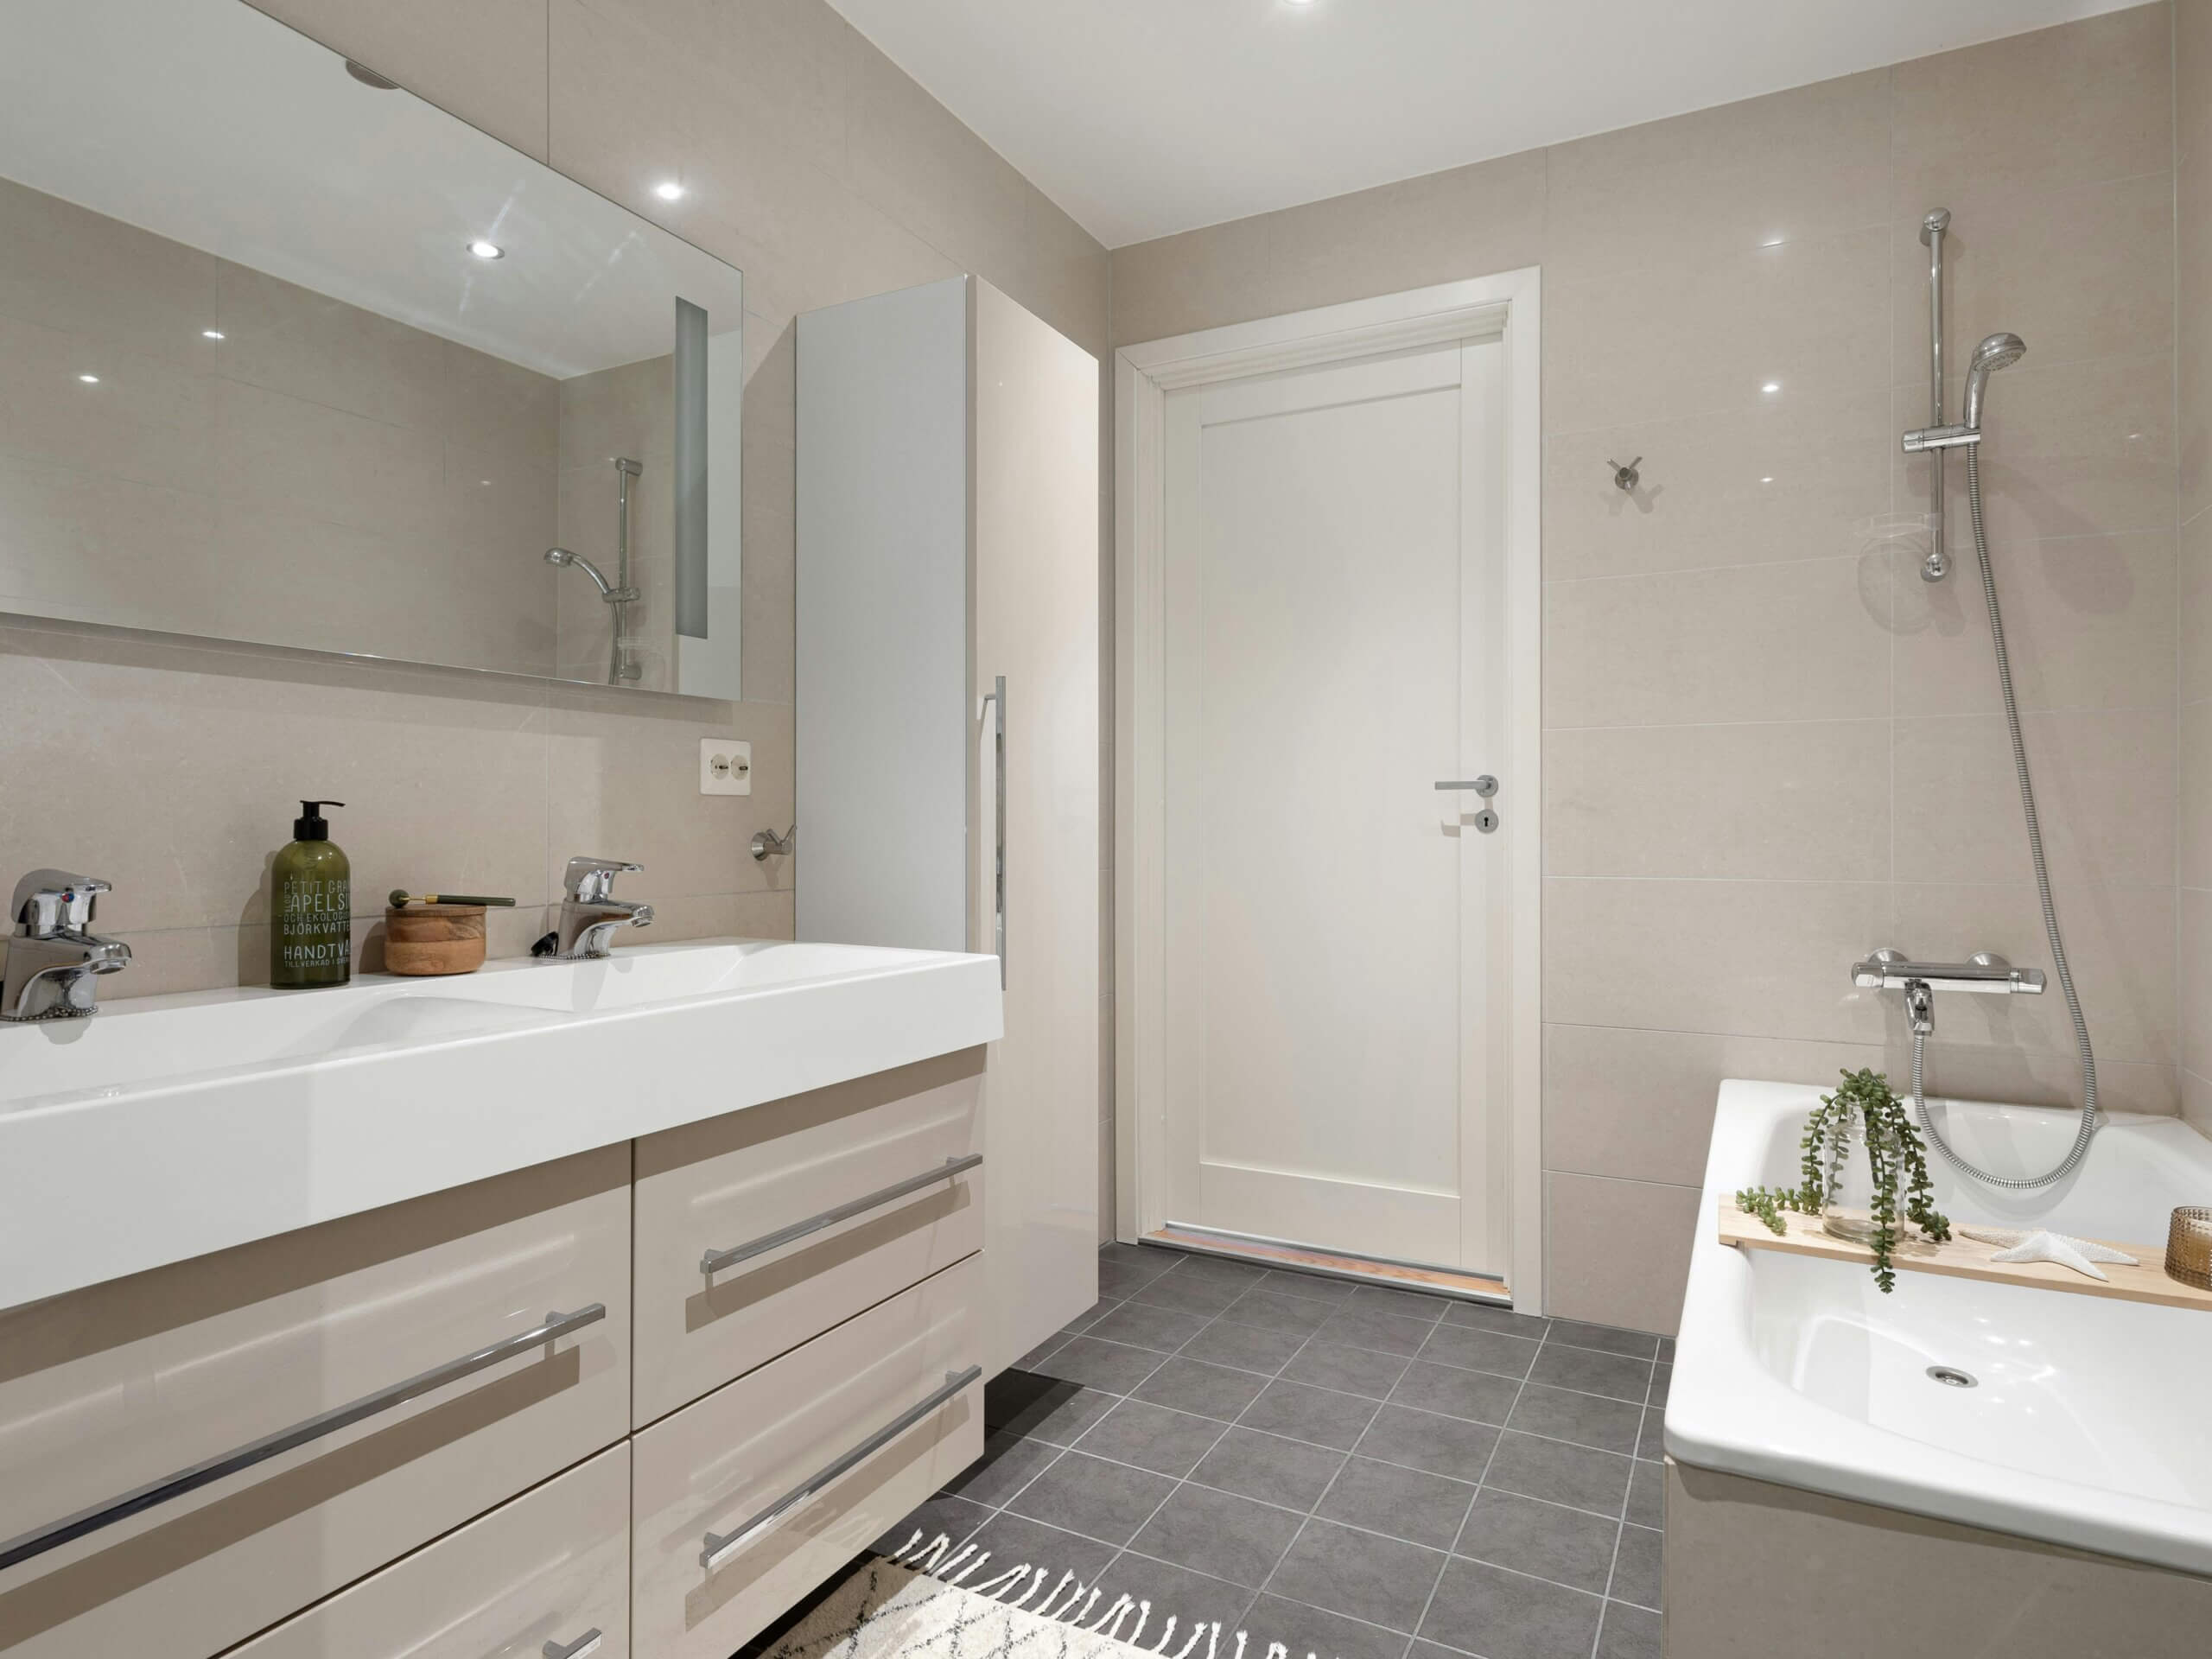 Smart Strategies for Saving on Your Bathroom Remodel